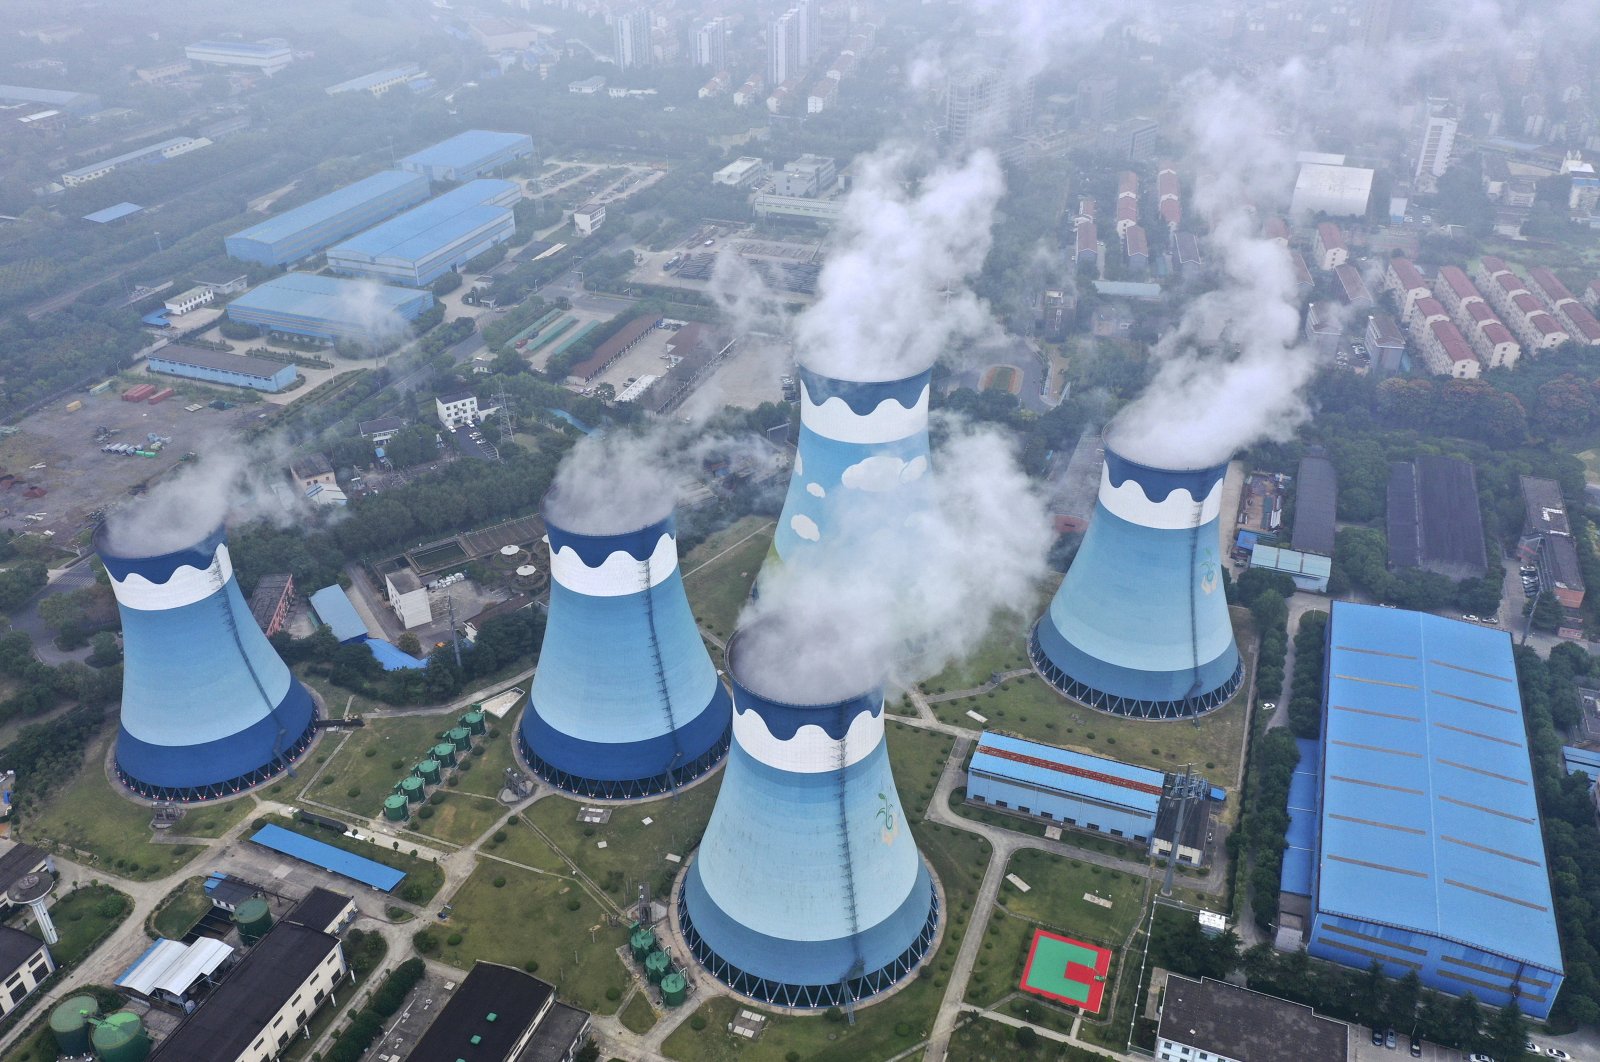 Steam billows out of the cooling towers at a coal-fired power station in Nanjing, Jiangsu province, eastern China, Sept. 27, 2021. (AP Photo)